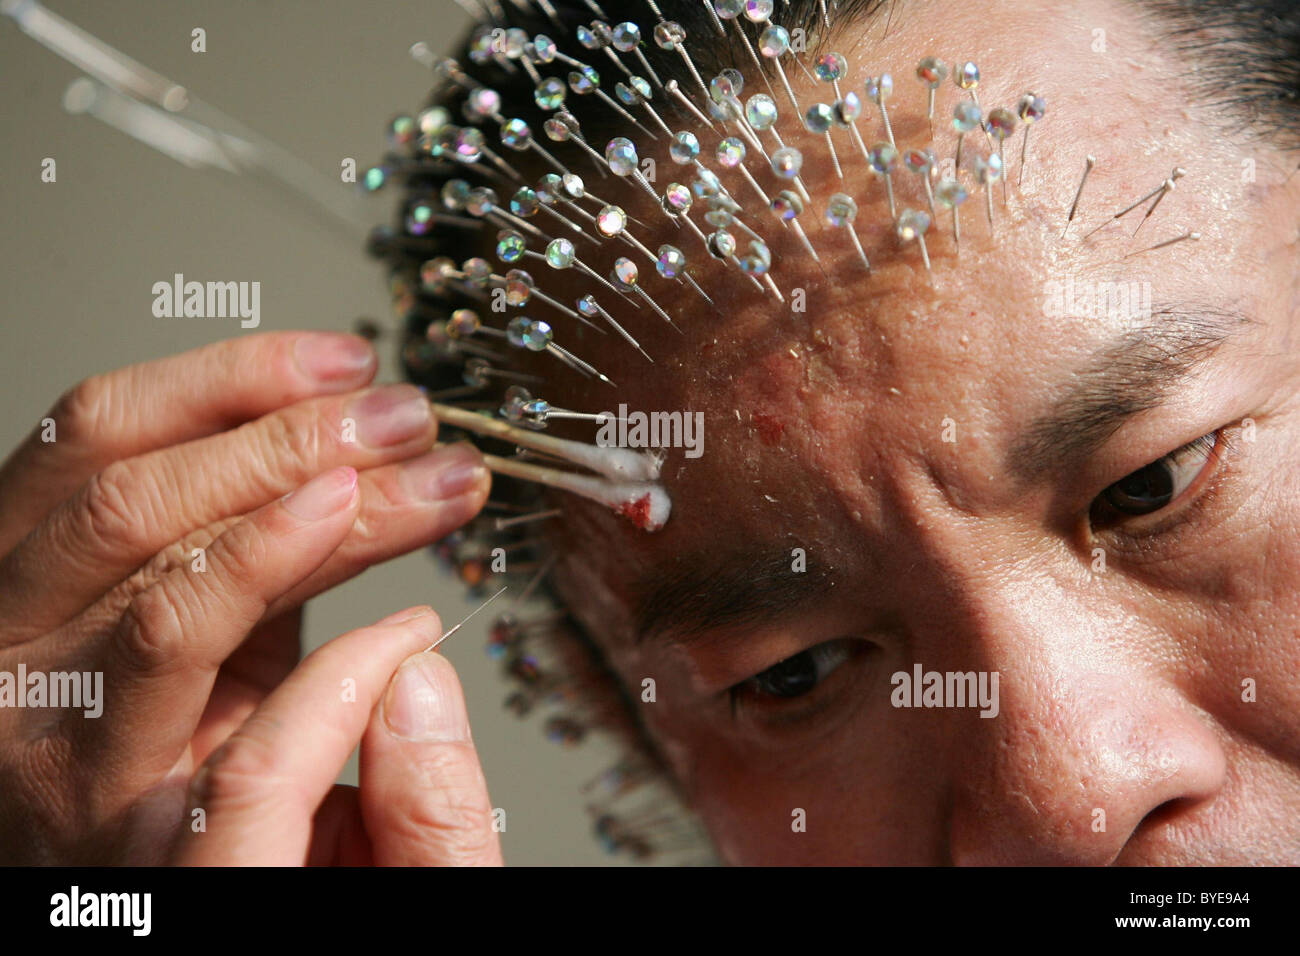 PRICK ADDICTION Wei Shengchu got hooked on needles after undergoing  acupuncture. After the needles were removed and his Stock Photo - Alamy